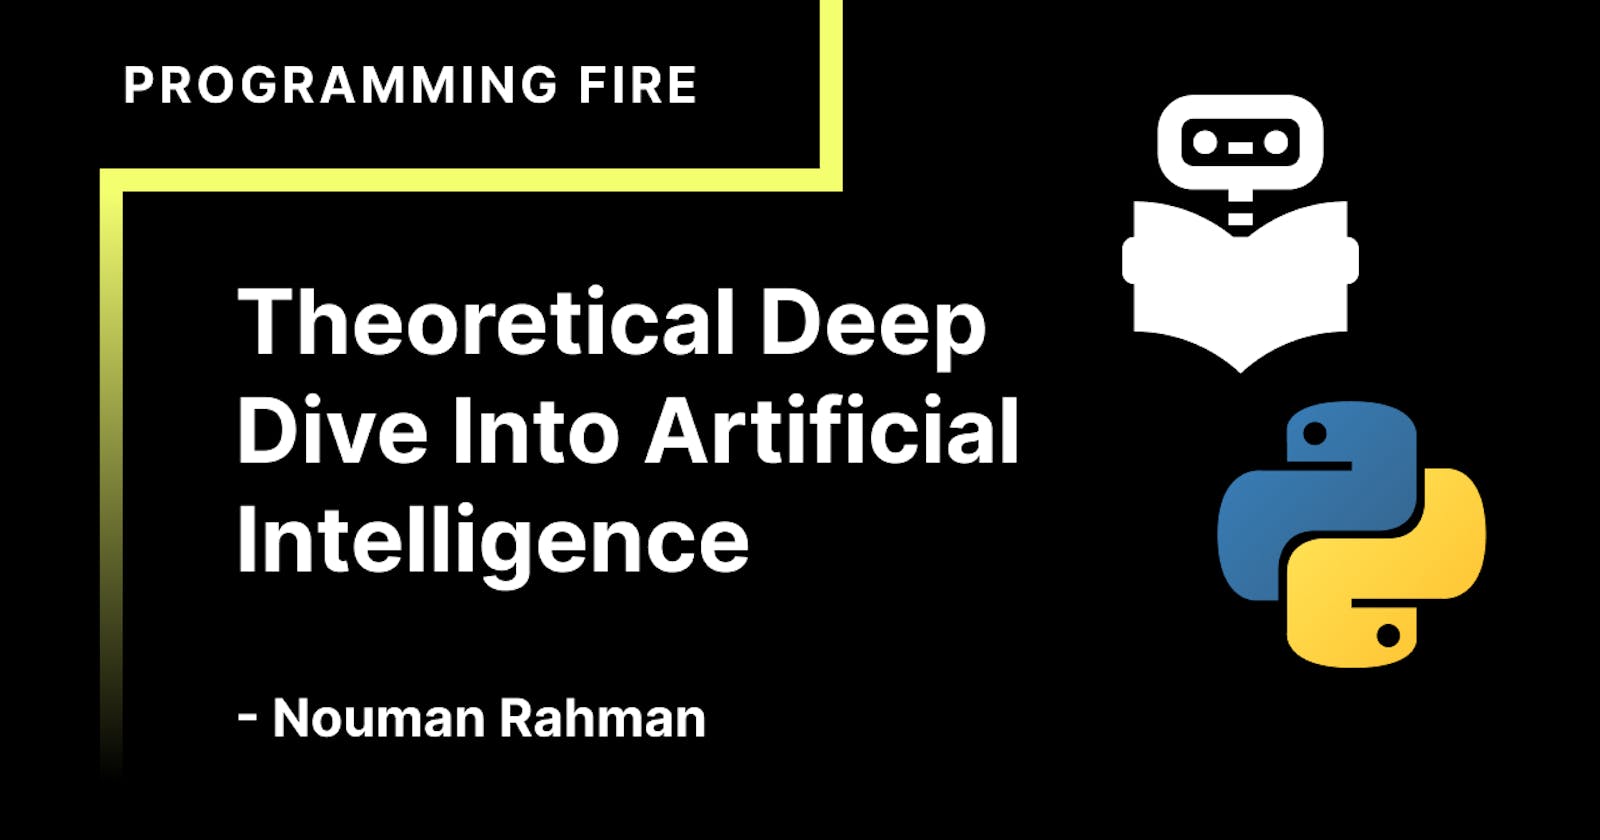 A Theoretical Deep Dive Into Artificial Intelligence